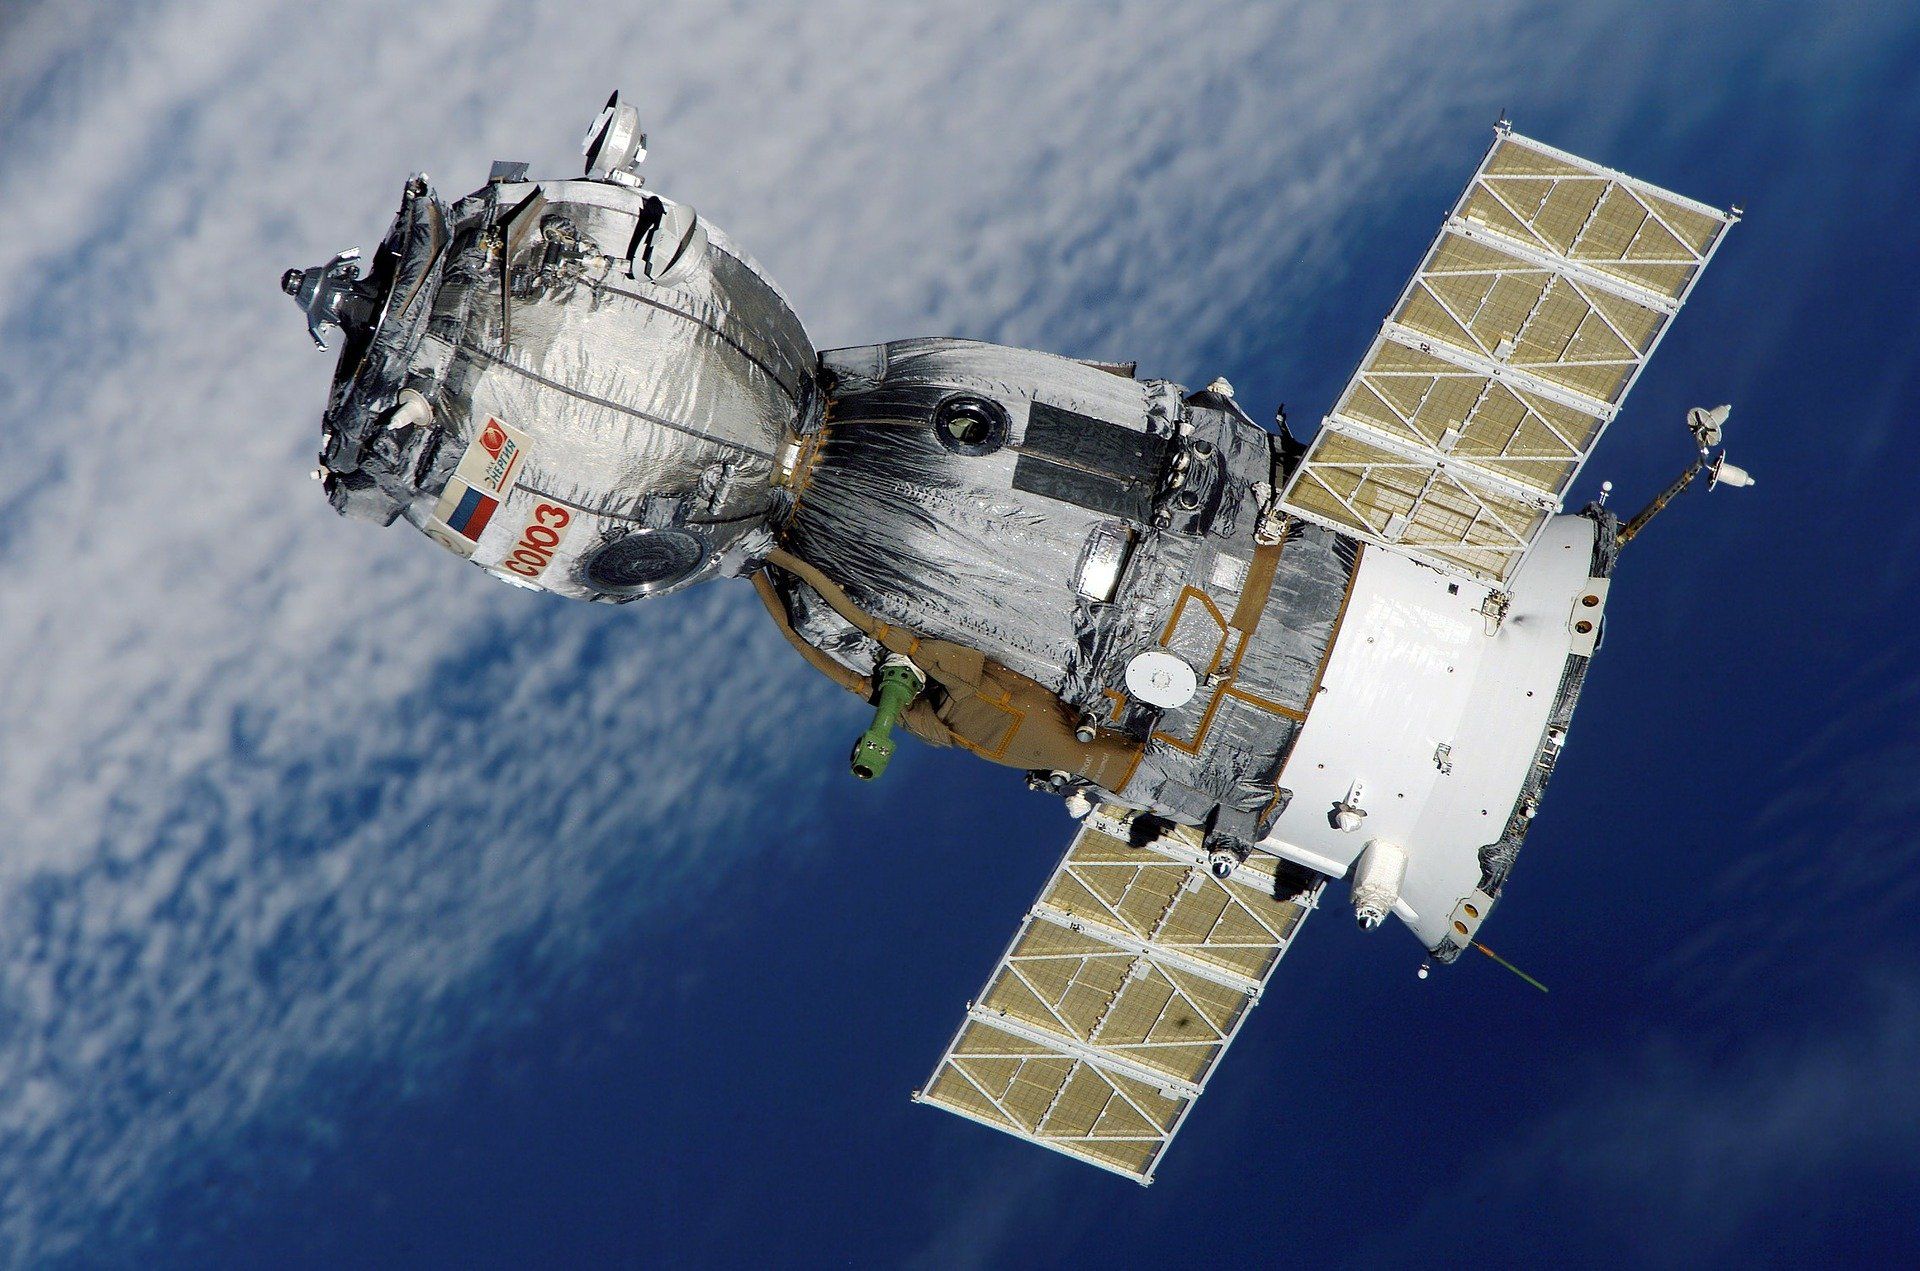 Russian space agency Roscosmos warns of war if its satellites are hacked